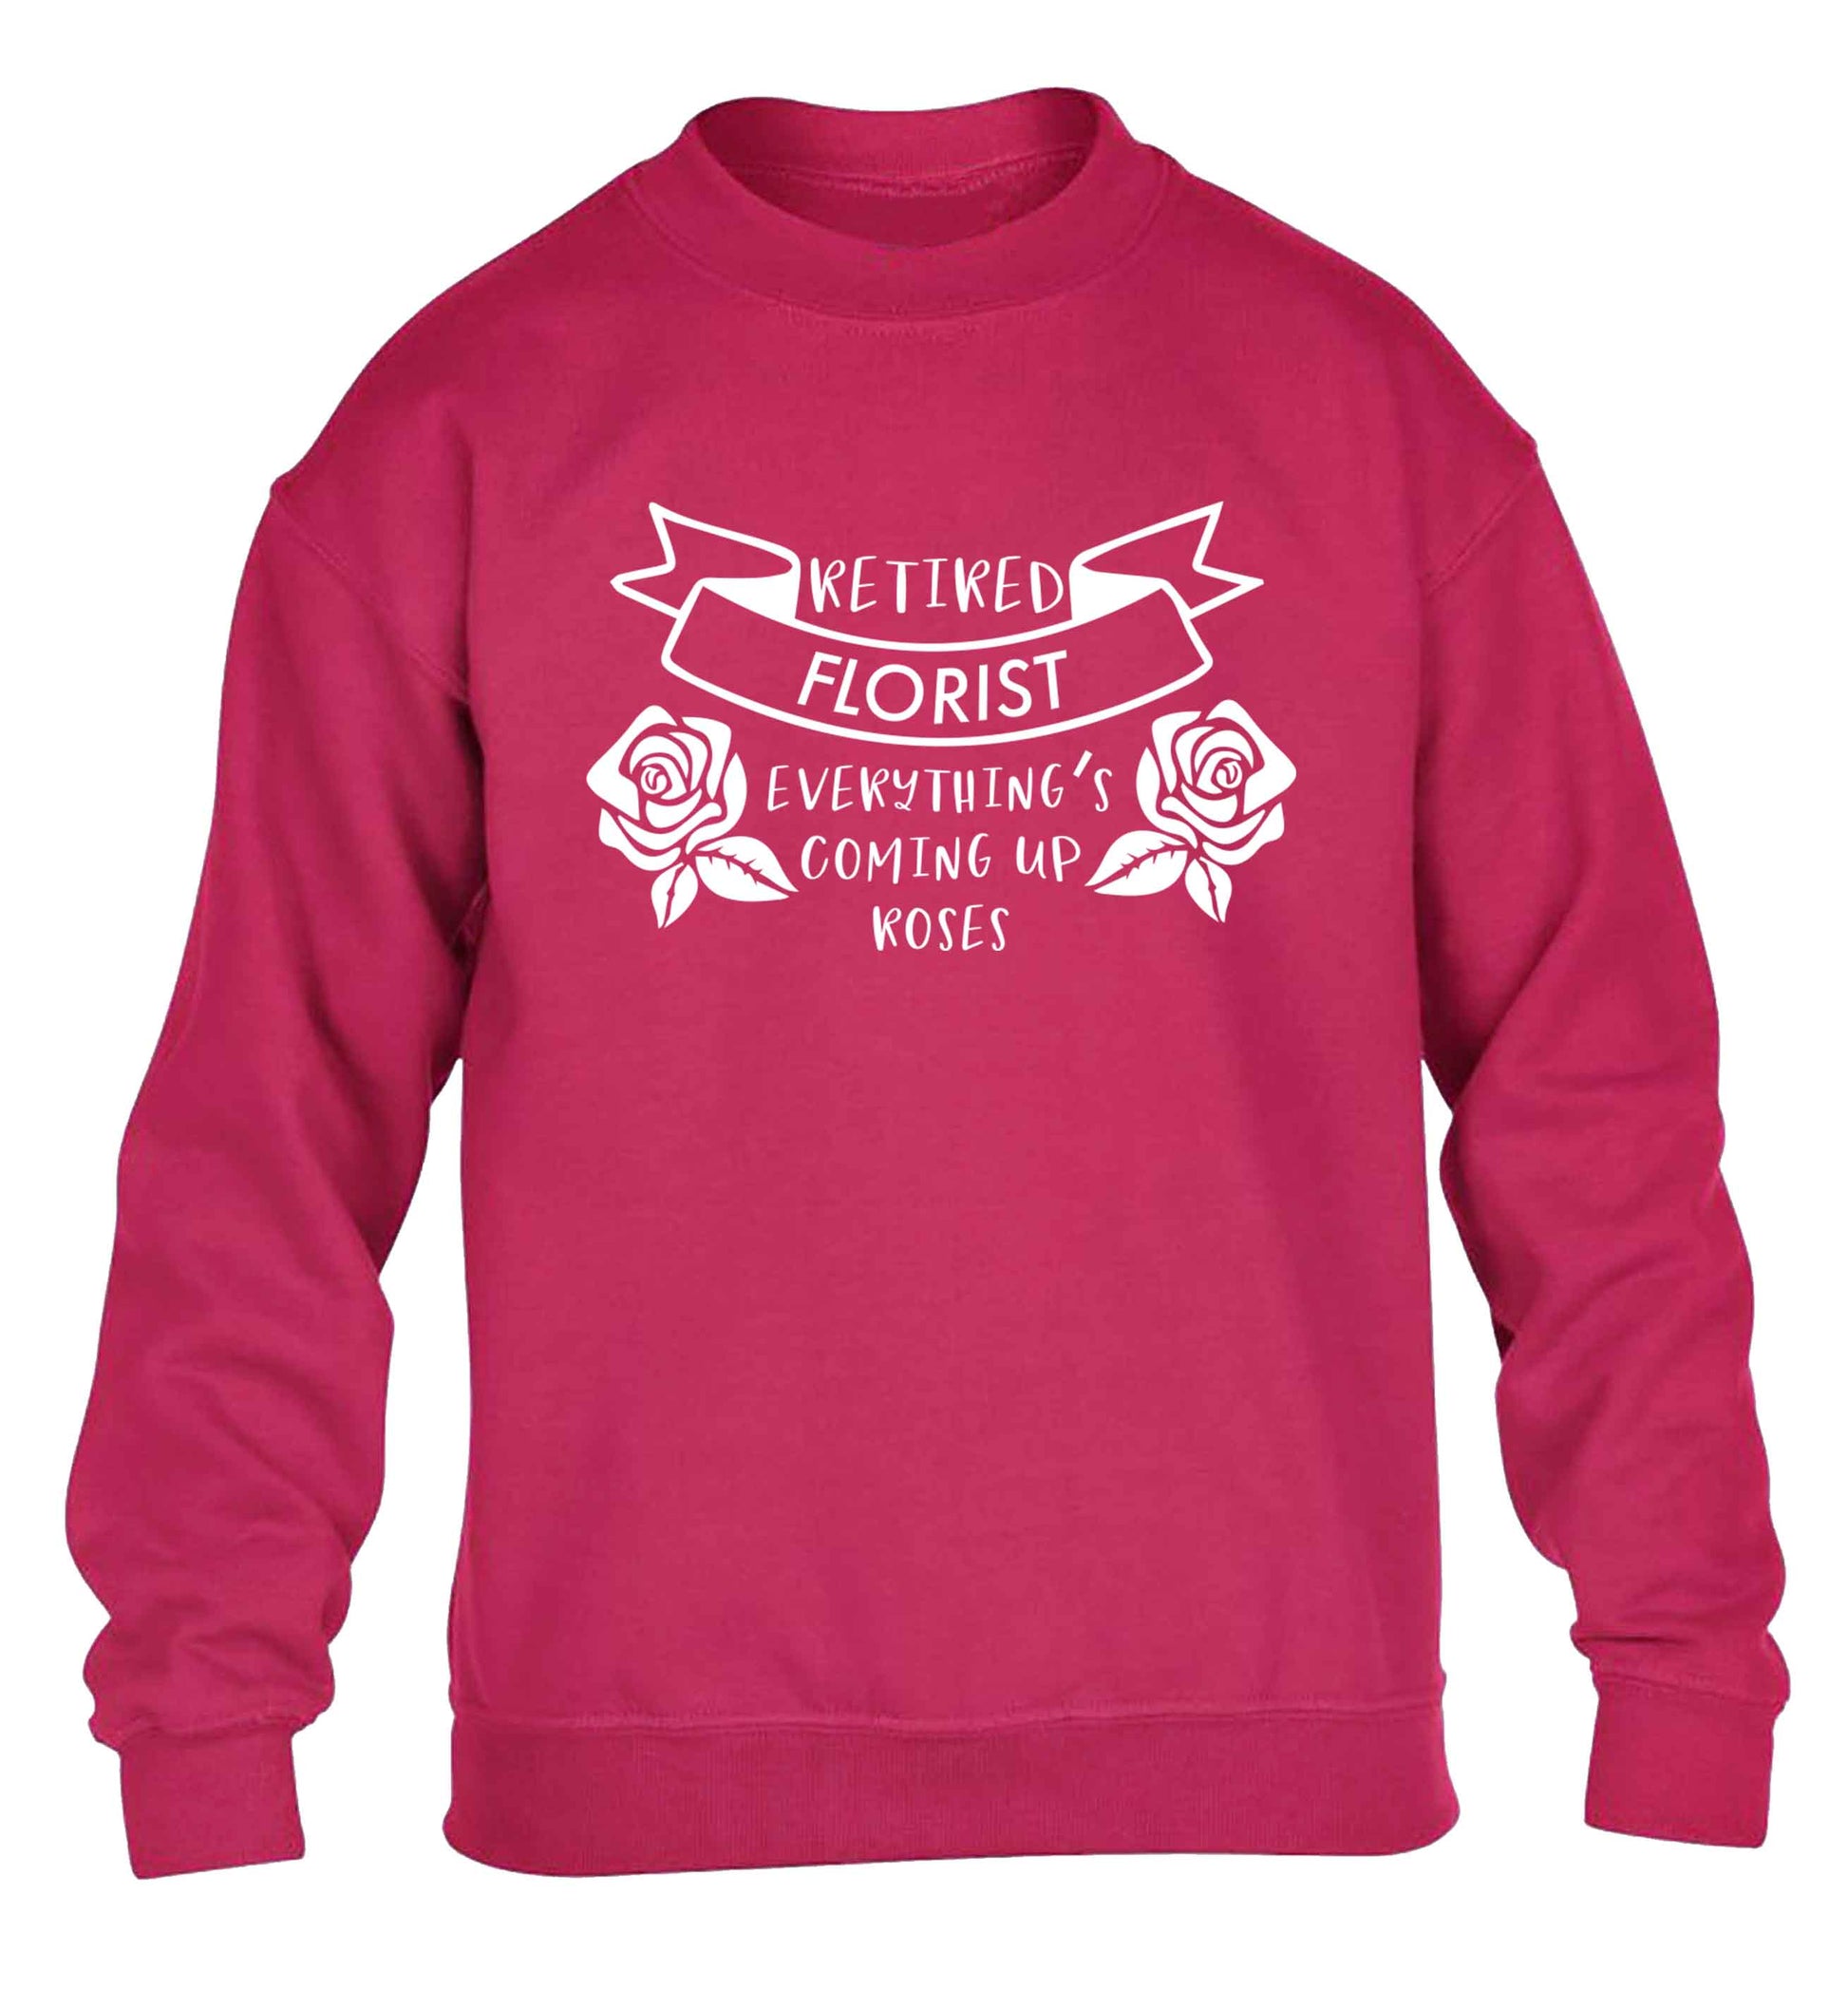 Retired florist everything's coming up roses children's pink sweater 12-13 Years